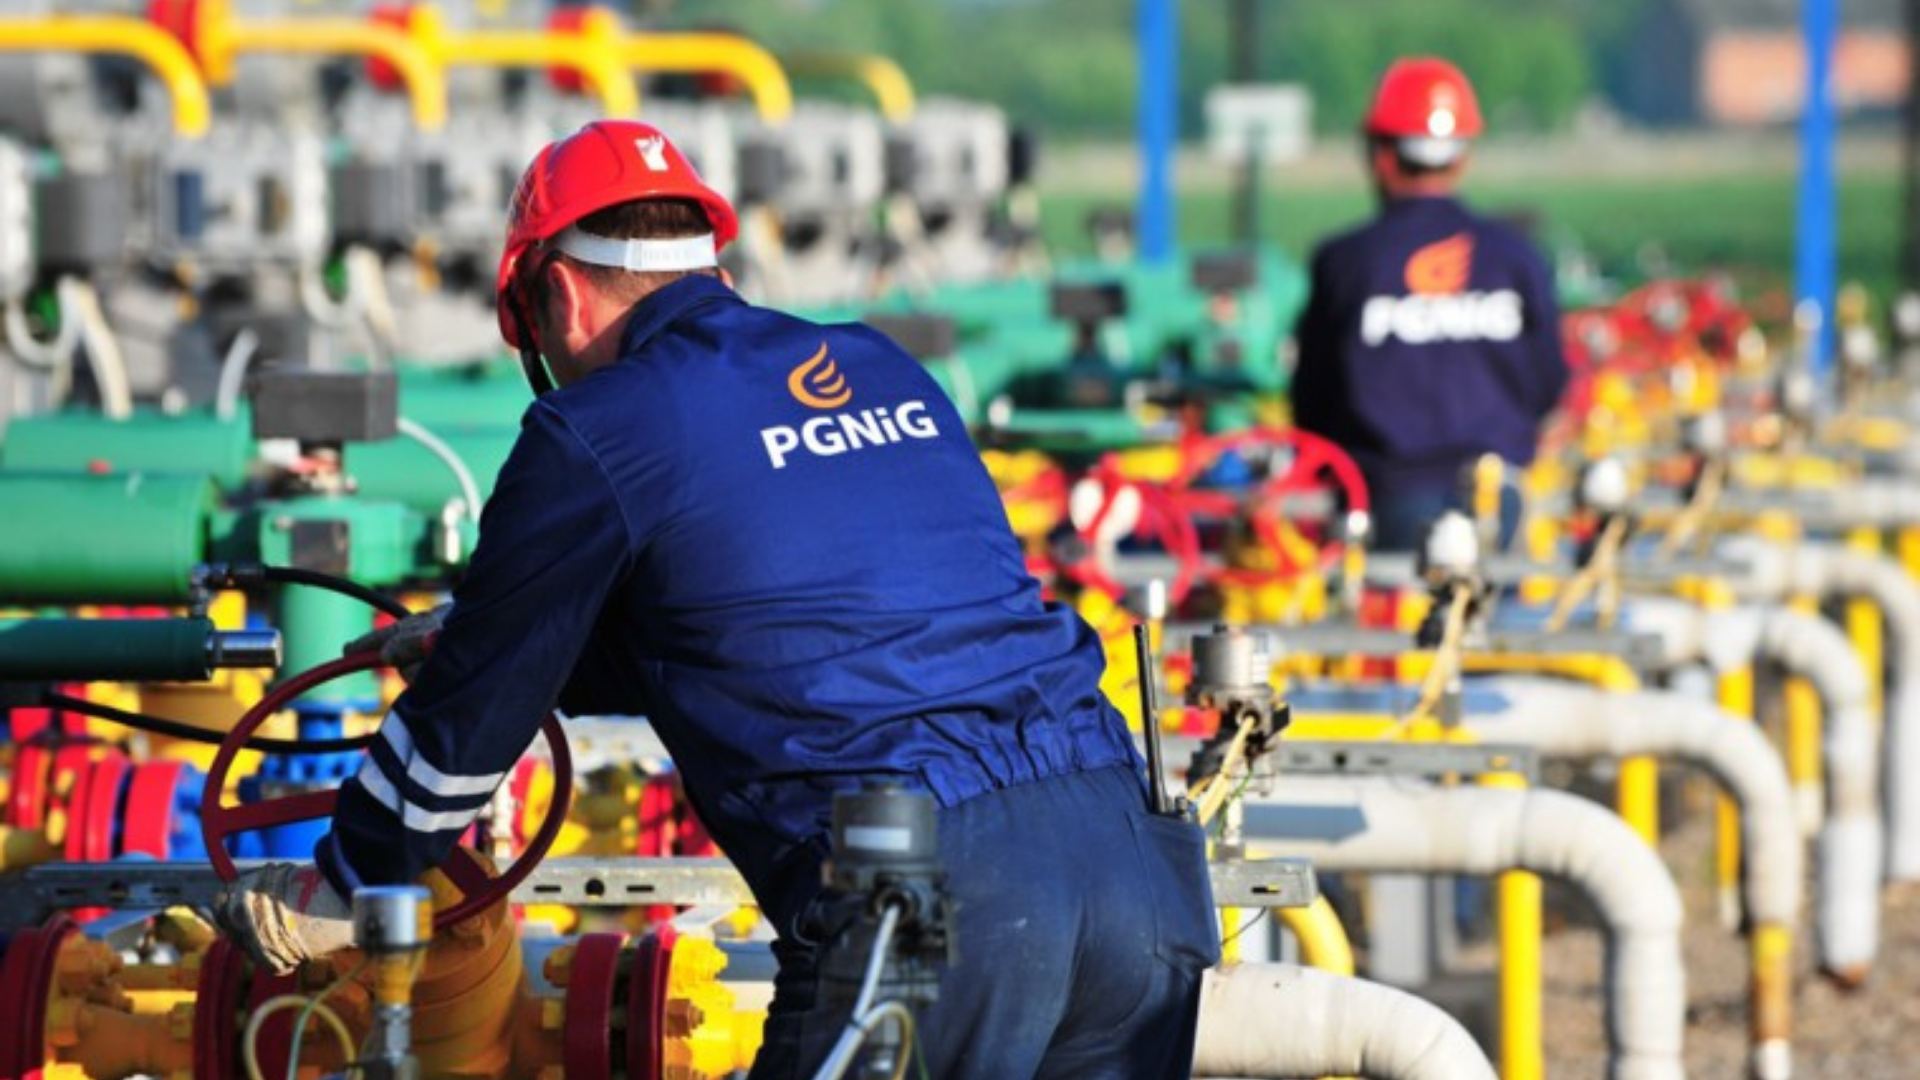 PGNiG and Naftogaz: a step towards joint gas production in Ukraine